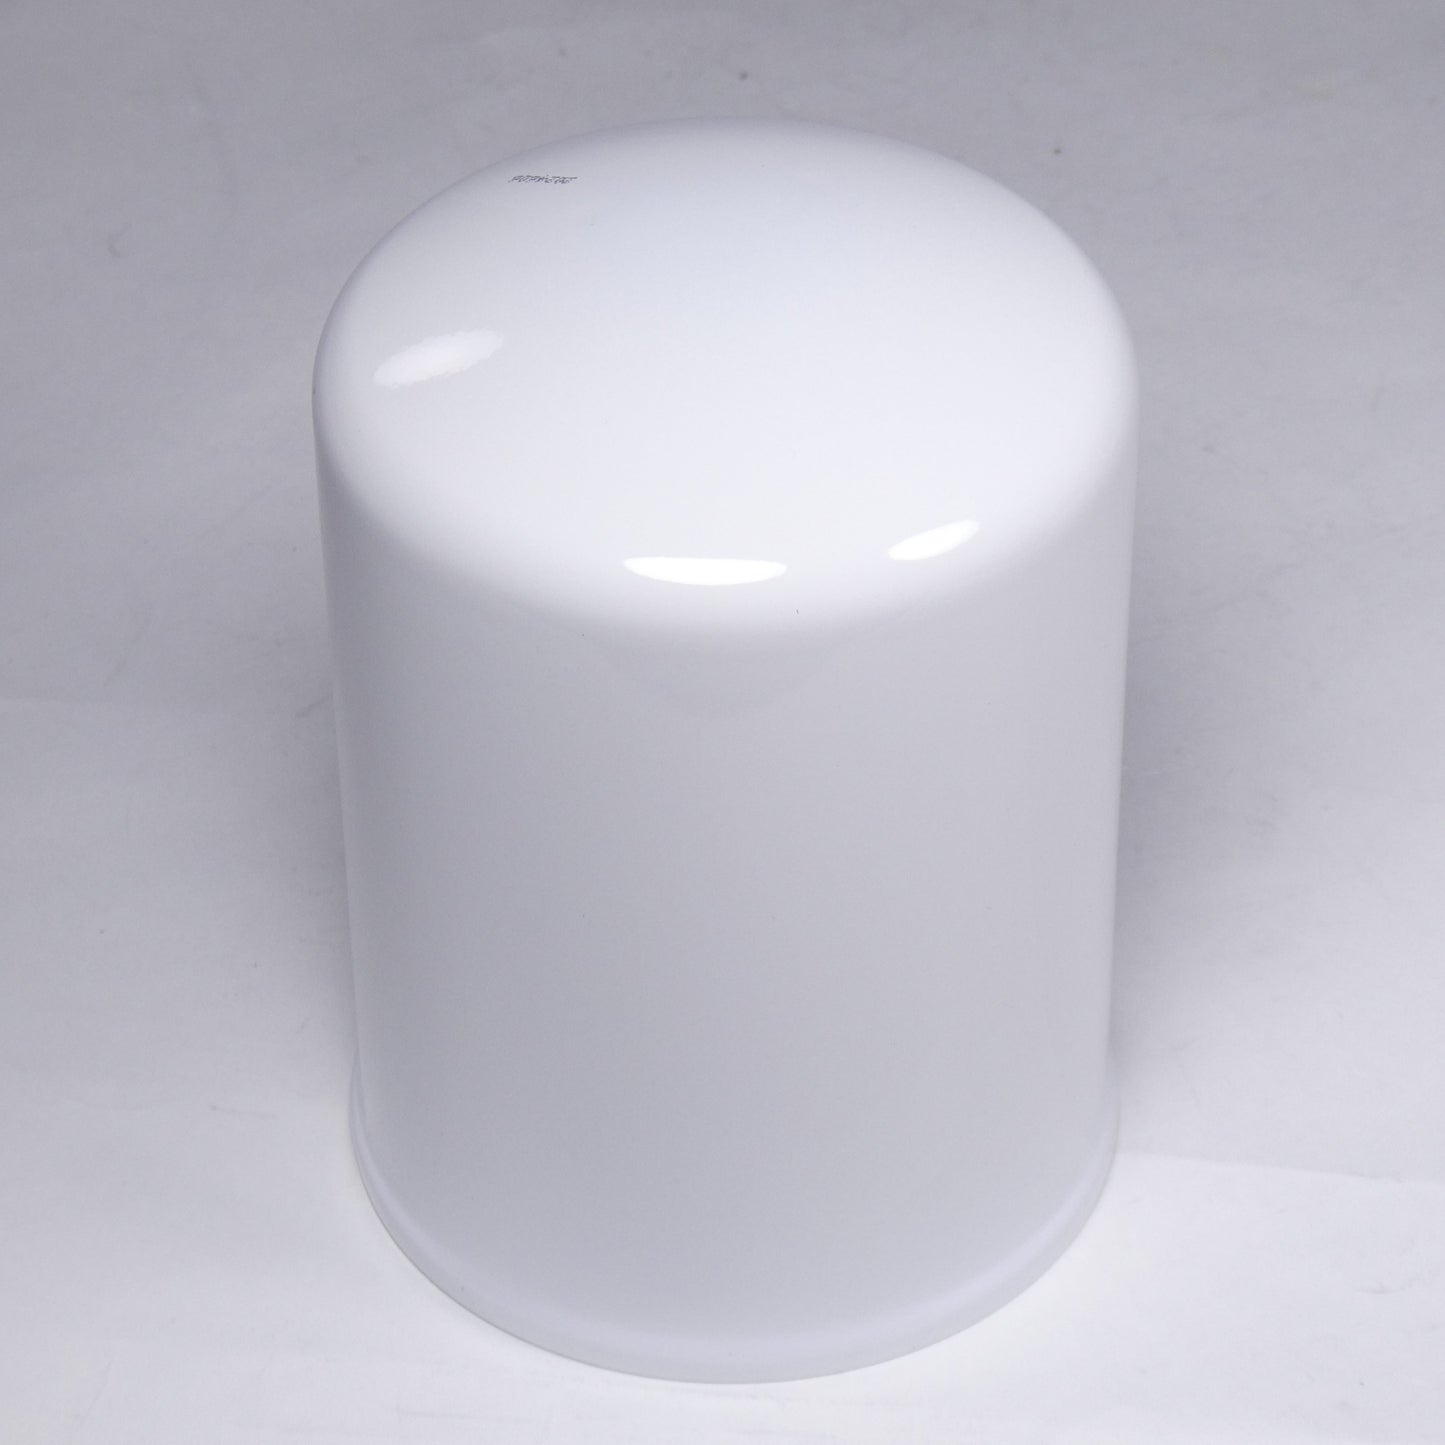 Hydrafil Replacement Filter Element for Marion S59